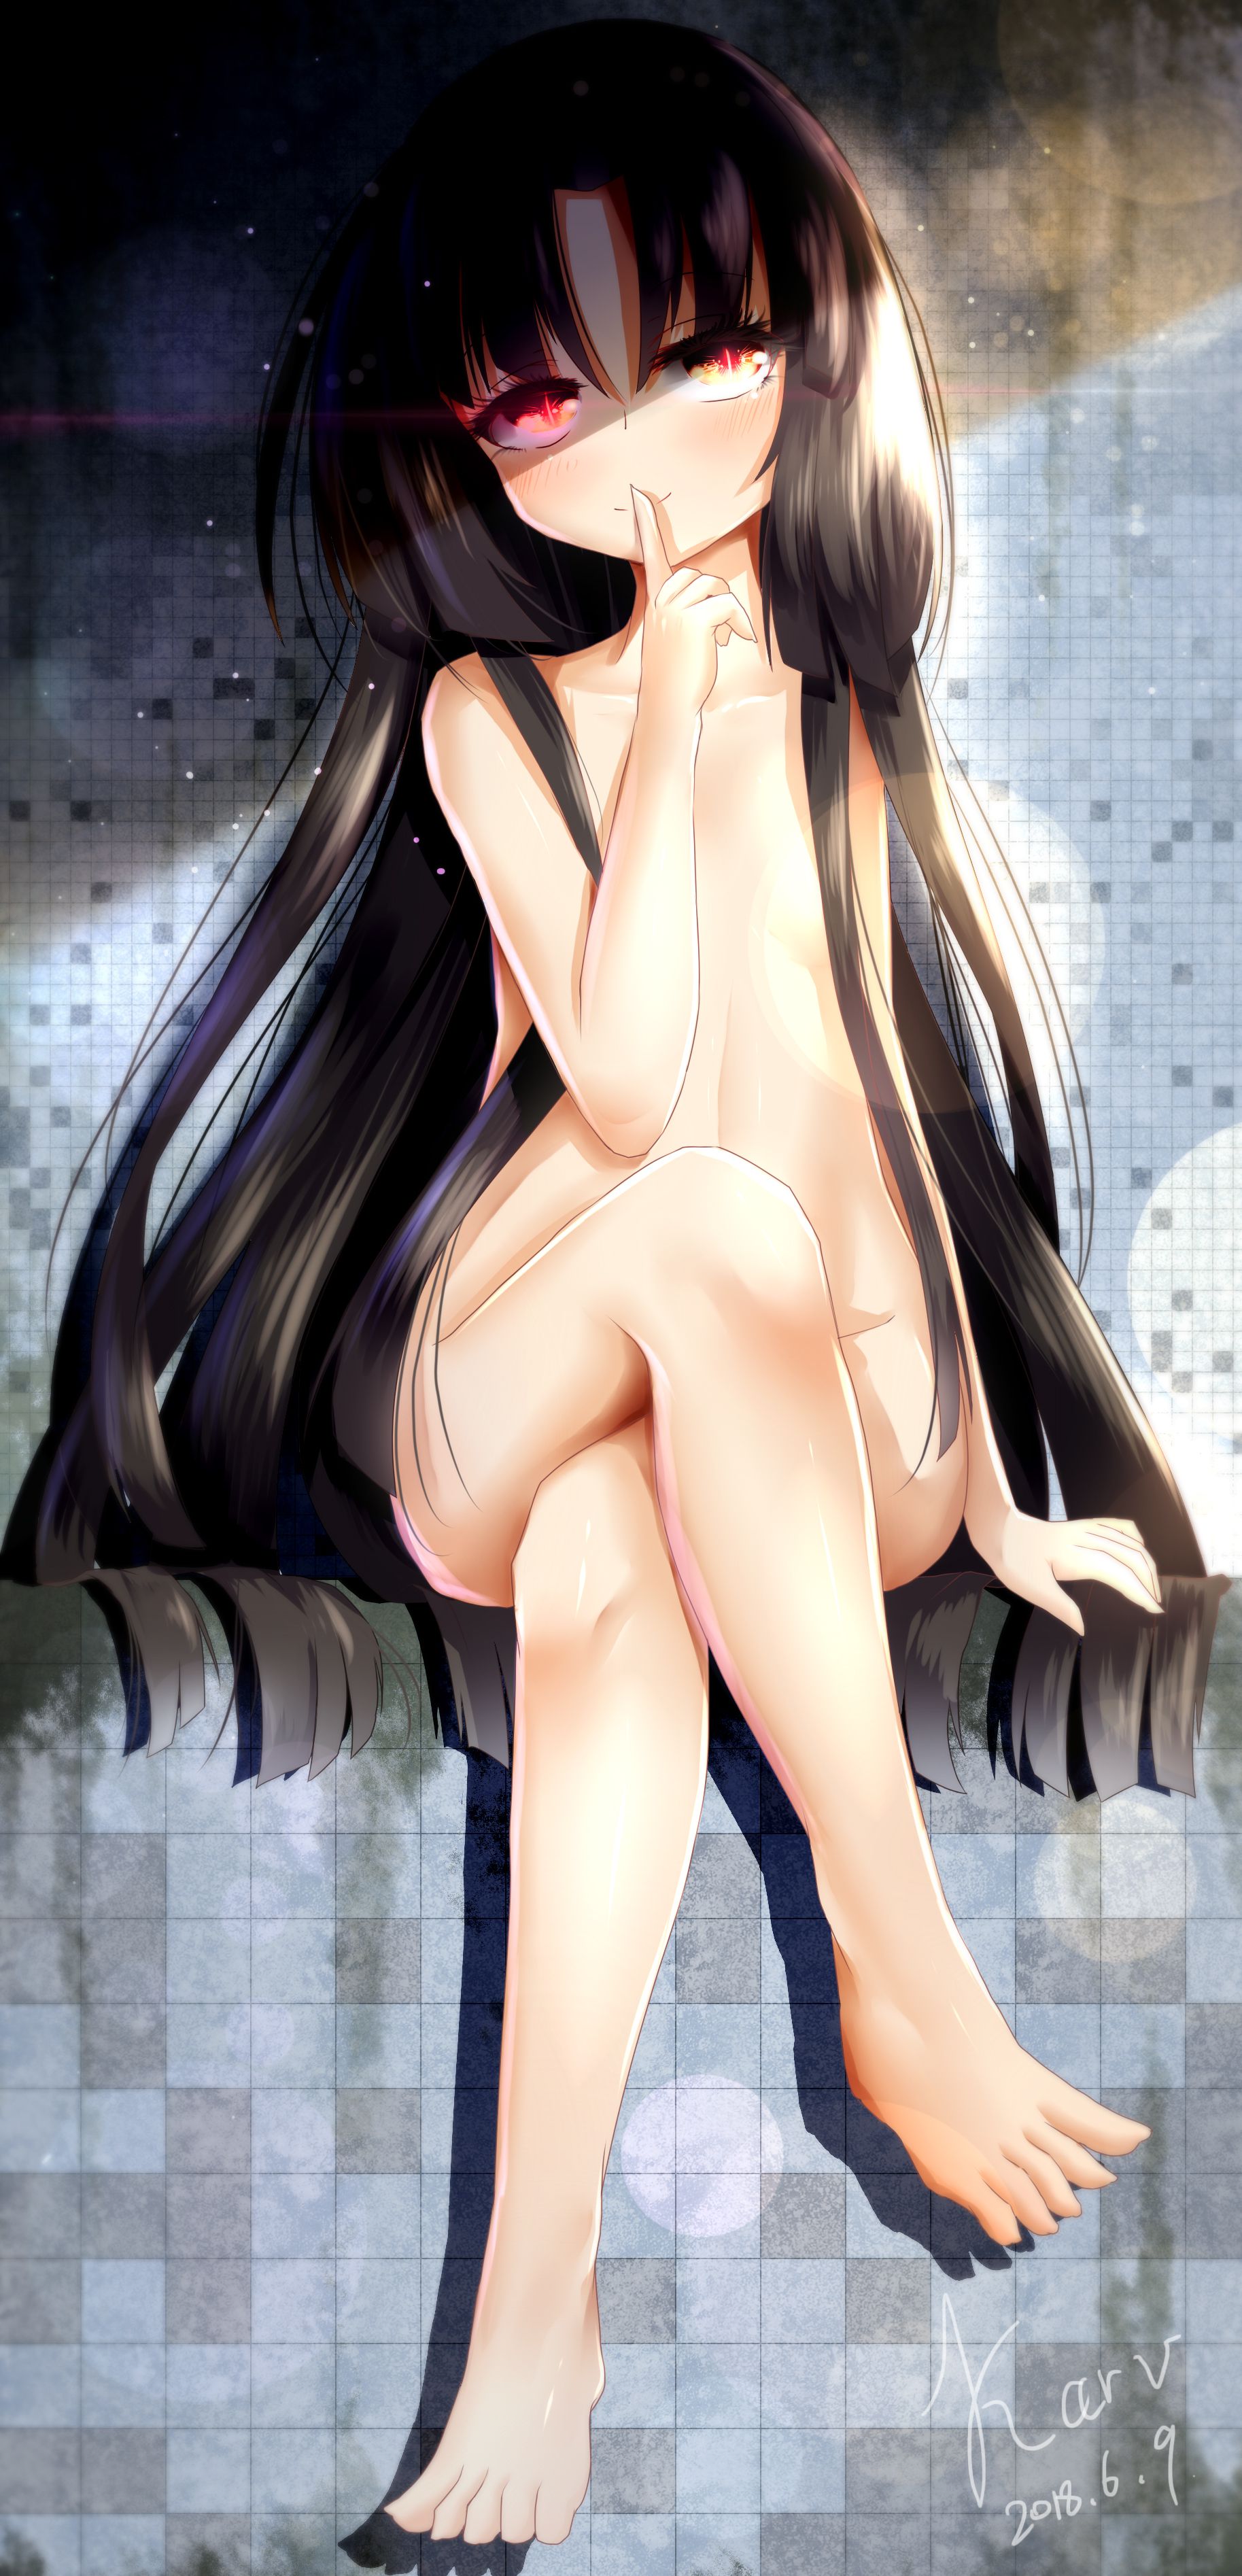 Erotic anime summary erotic image collection of naked beautiful women and beautiful girls [50 sheets] 50